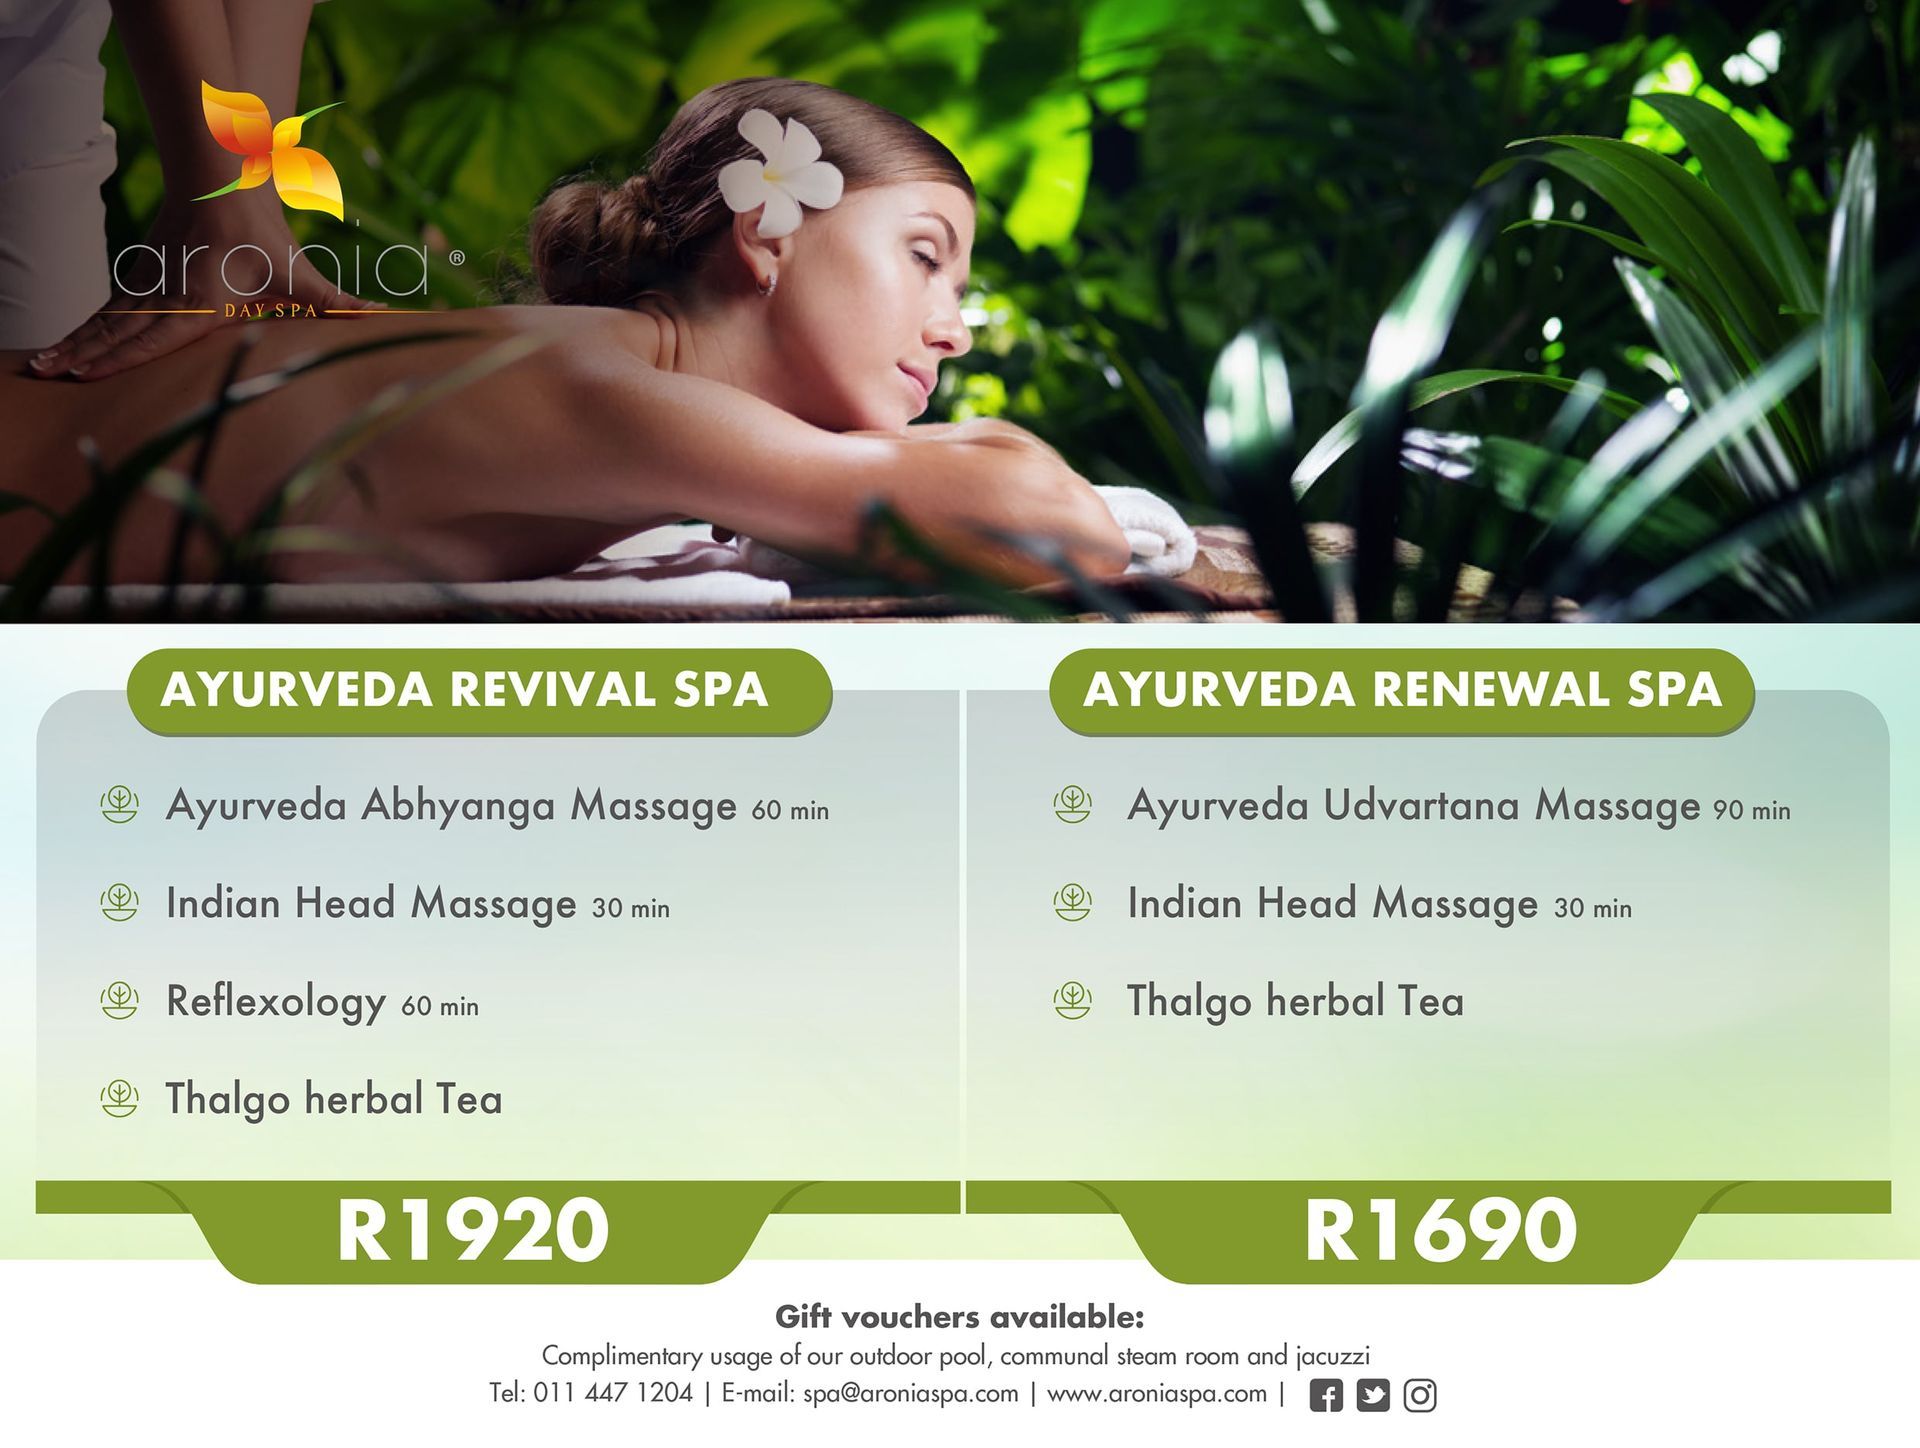 aronia spa packages johannesburg